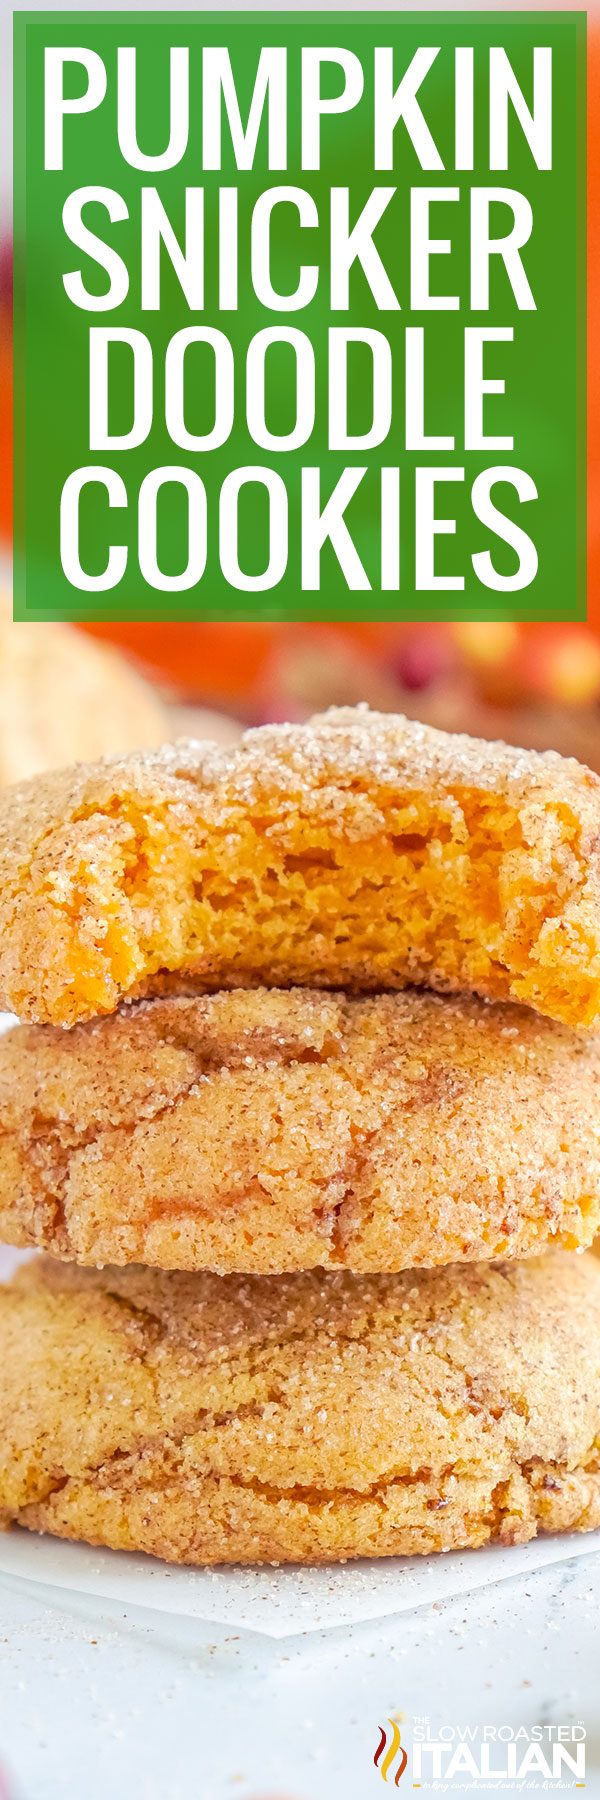 titled image (and shown): snickerdoodle cookies recipe